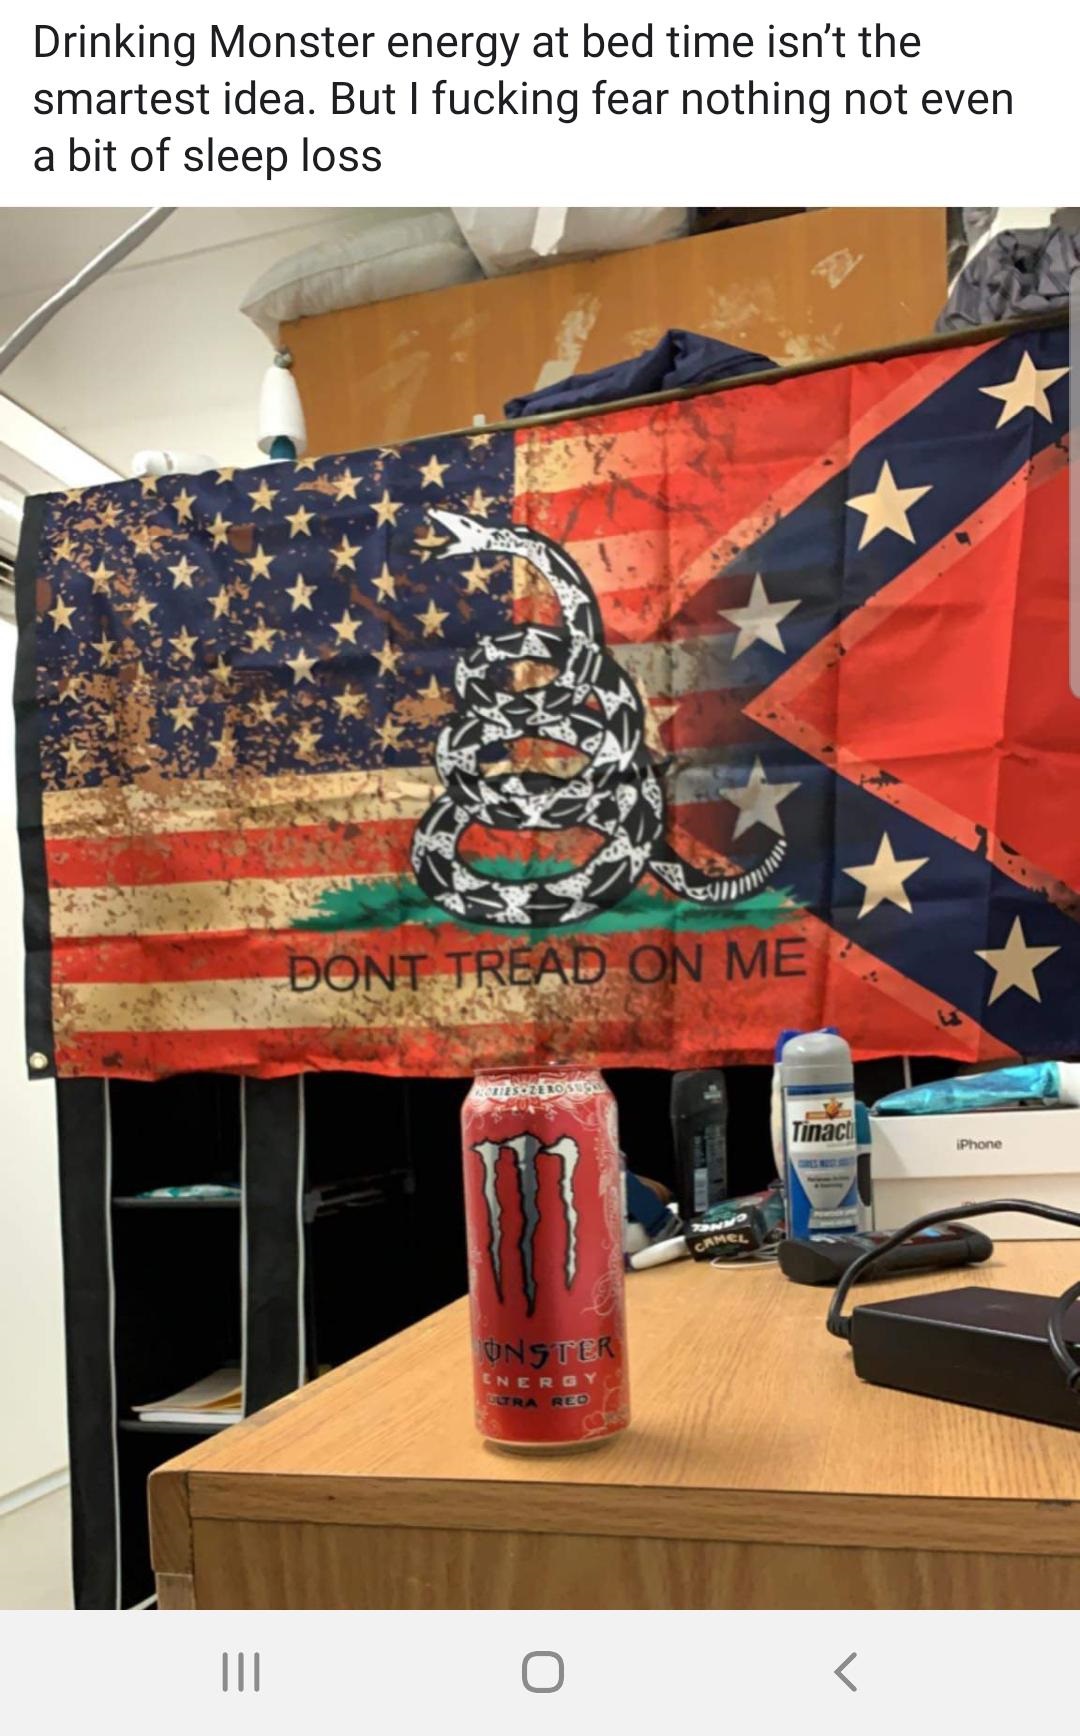 flag - Drinking Monster energy at bed time isn't the smartest idea. But I fucking fear nothing not even a bit of sleep loss Dont Tread On Me 183OZERO Sus Tinact iPhone Onster Energy Cura Red 110 S